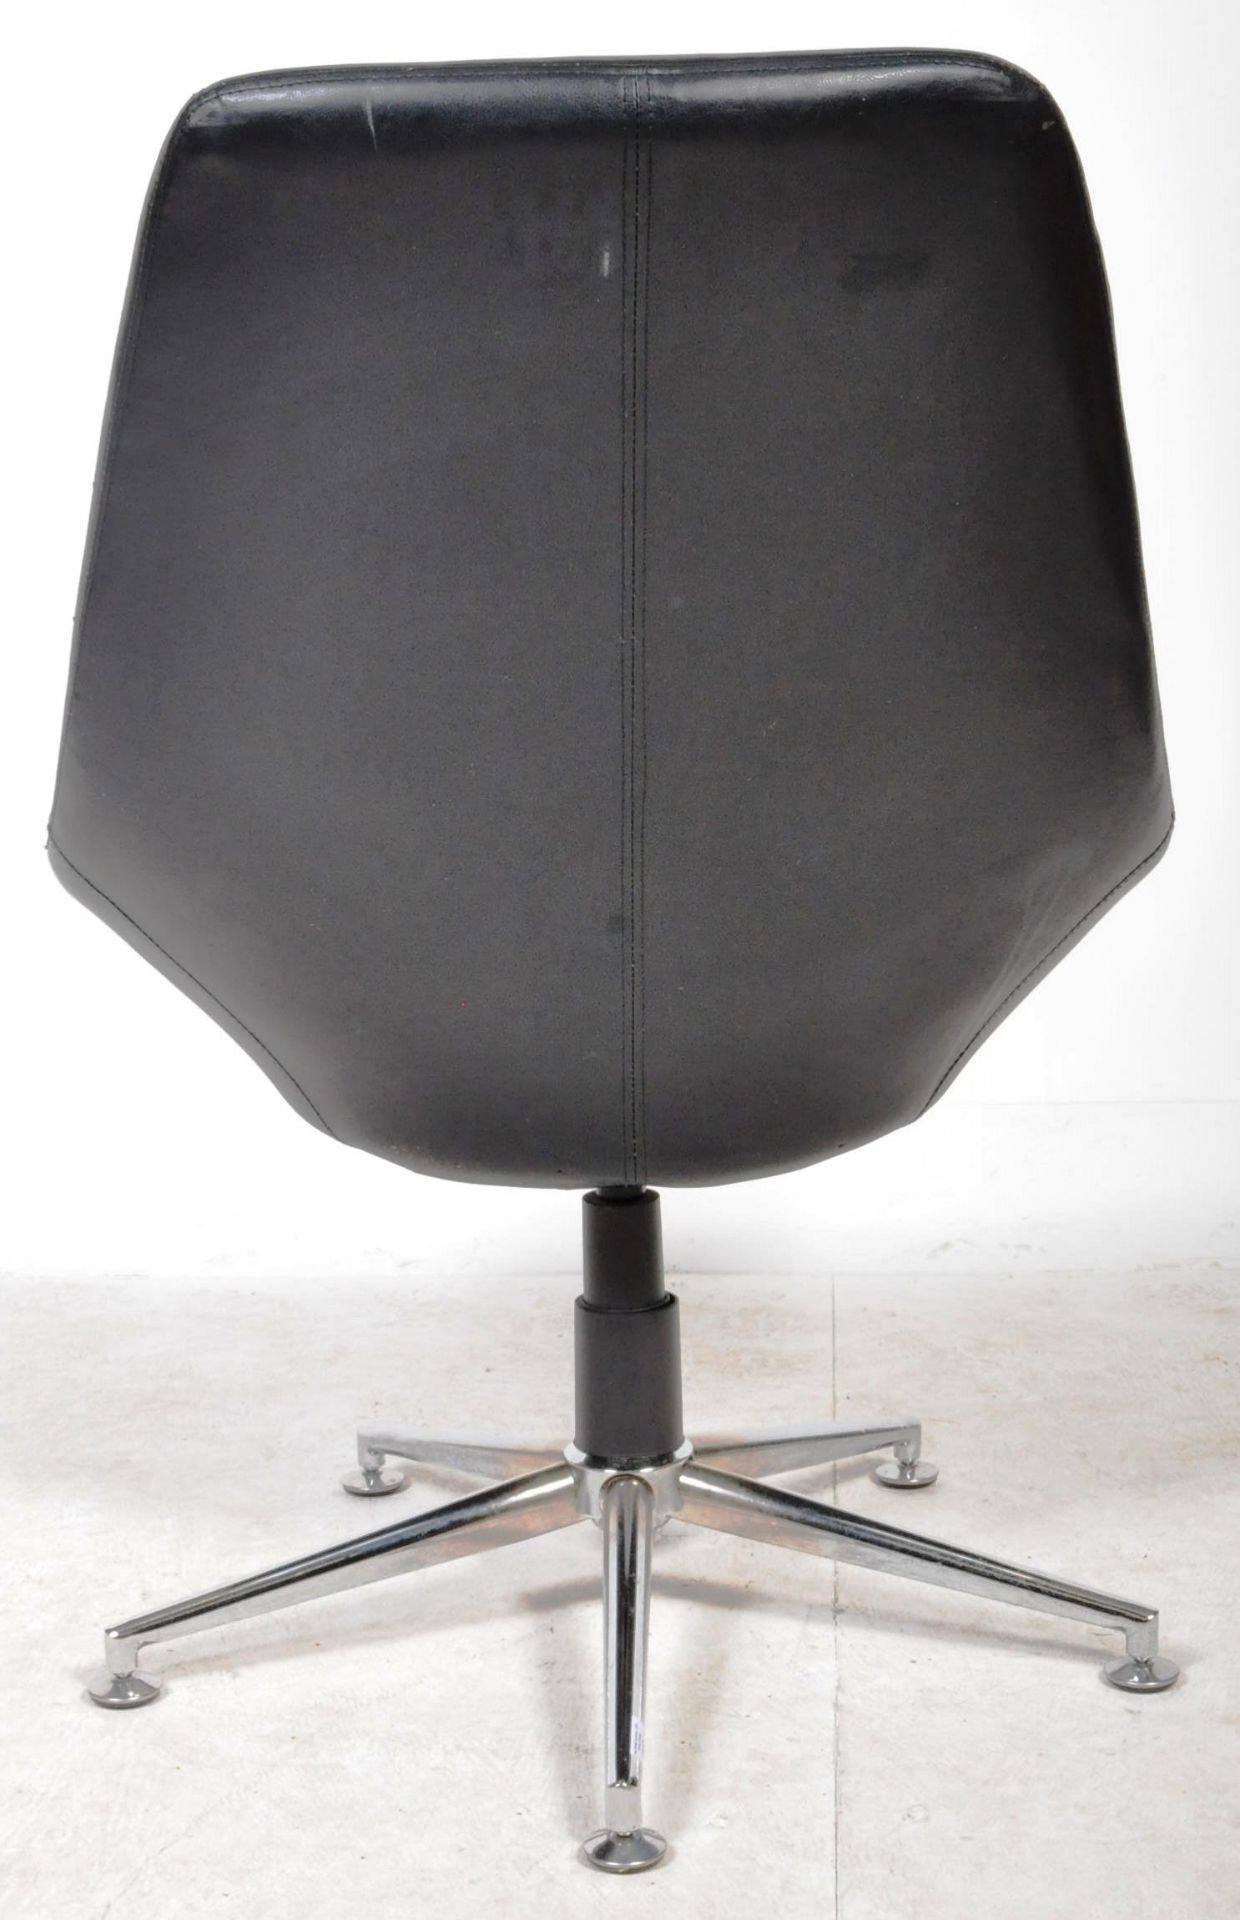 RETRO 1970'S BLACK LEATHER EGG CHAIR RAISED ON A CHROME BASE - Image 6 of 6